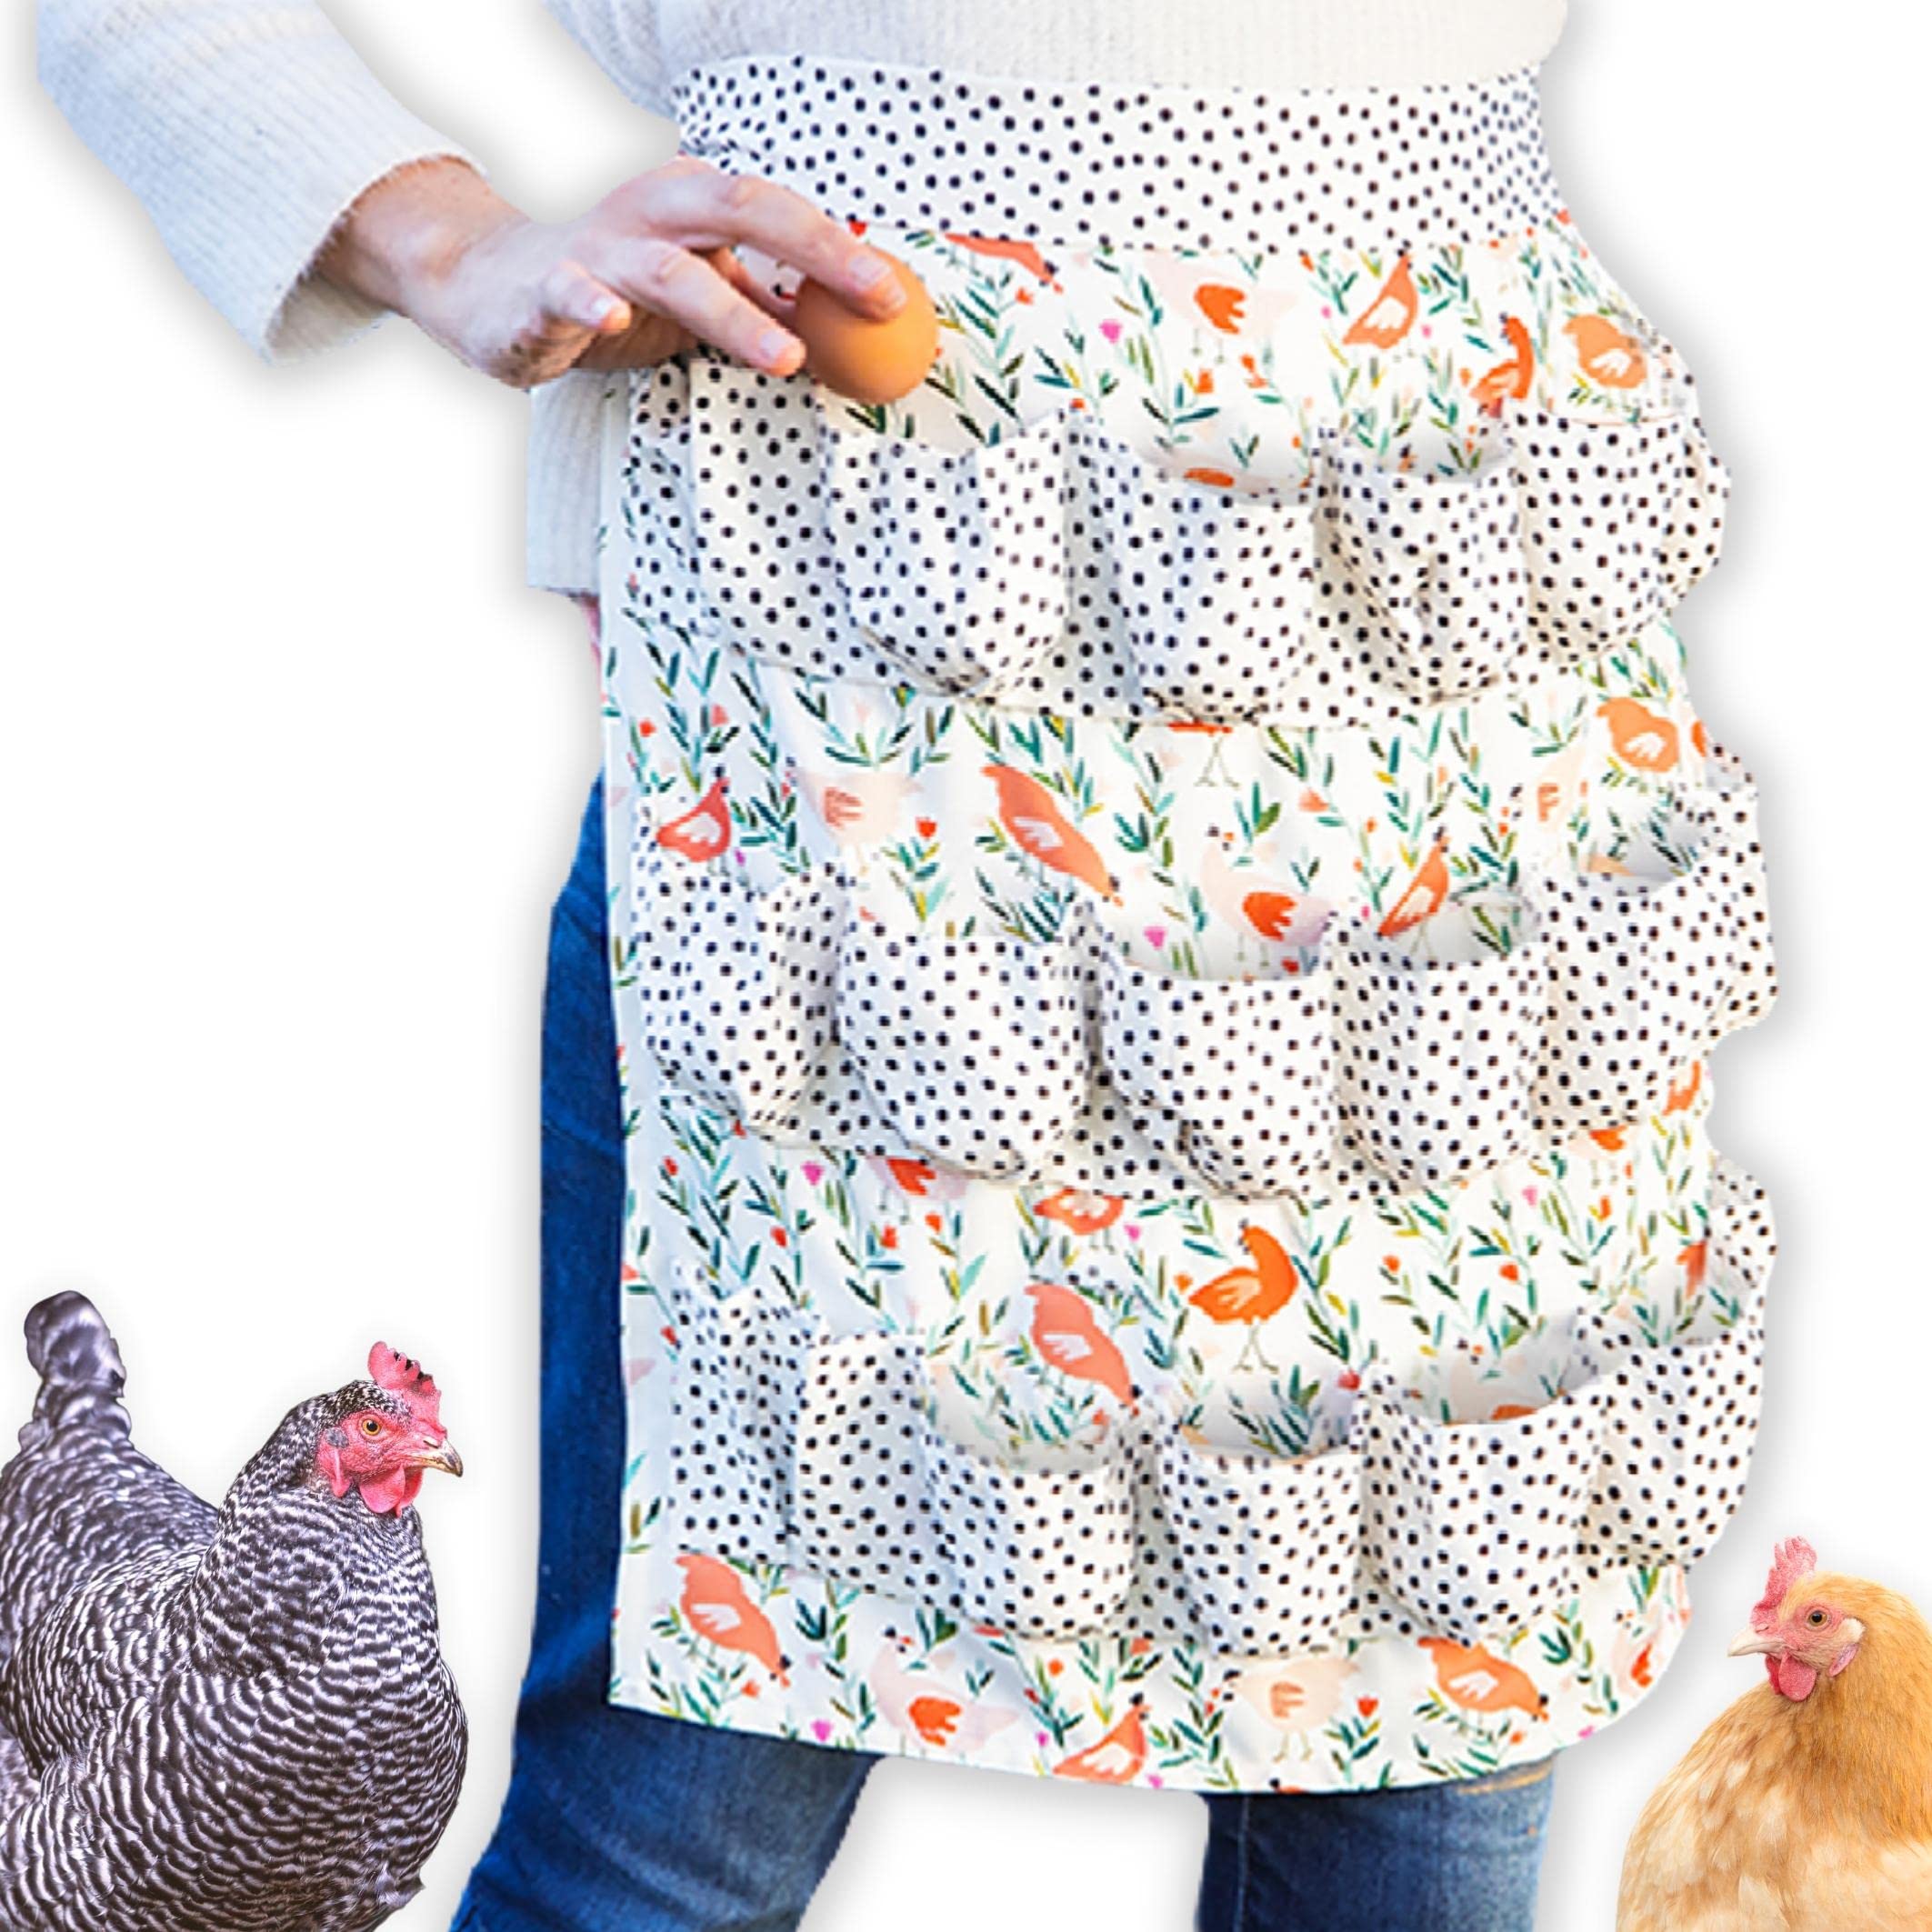 Egg Apron for Fresh Eggs, Egg Collecting Apron with 18 deep pockets, Chicken Egg Apron for Women, Egg gathering apron Multicolor